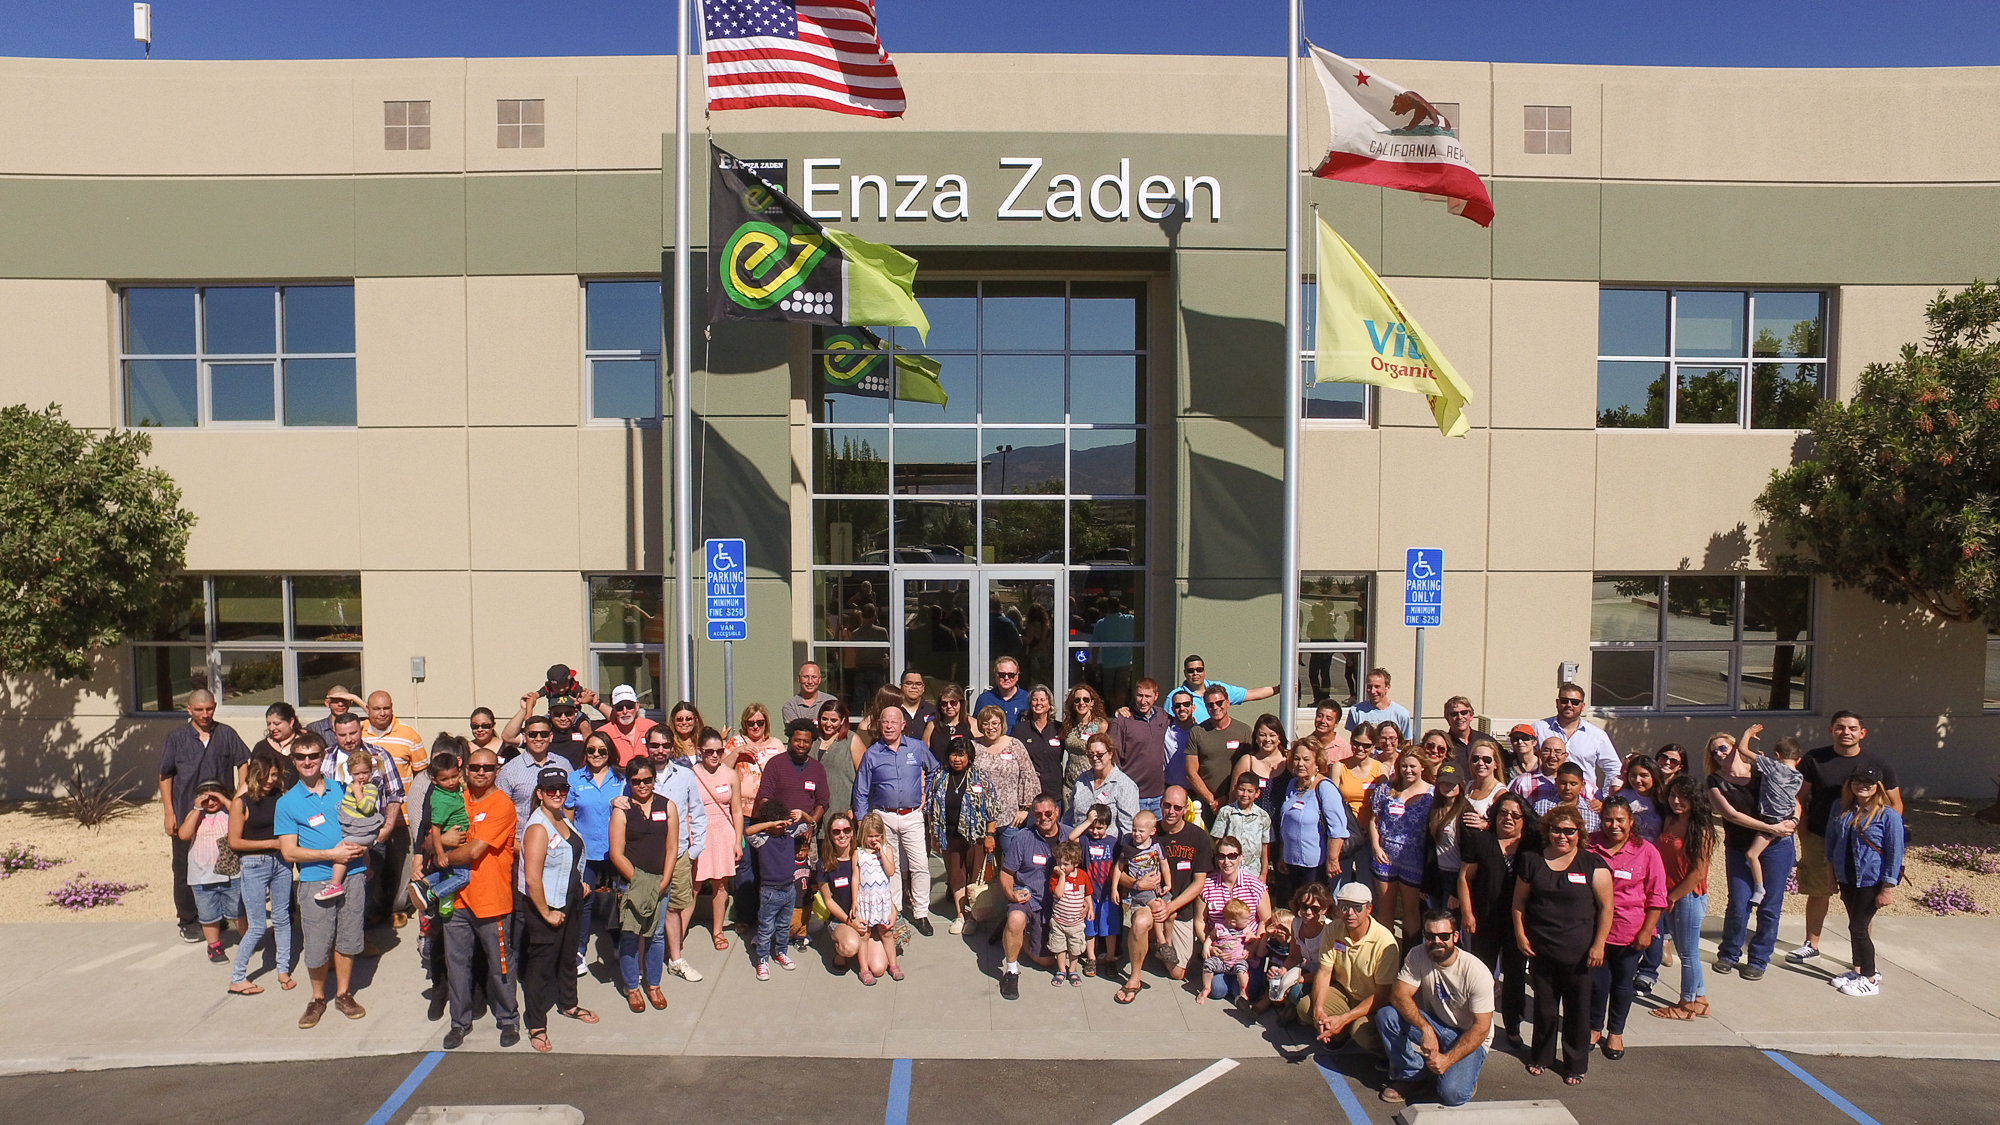 Enza Zaden doubles facility size in Salinas – Onion Business